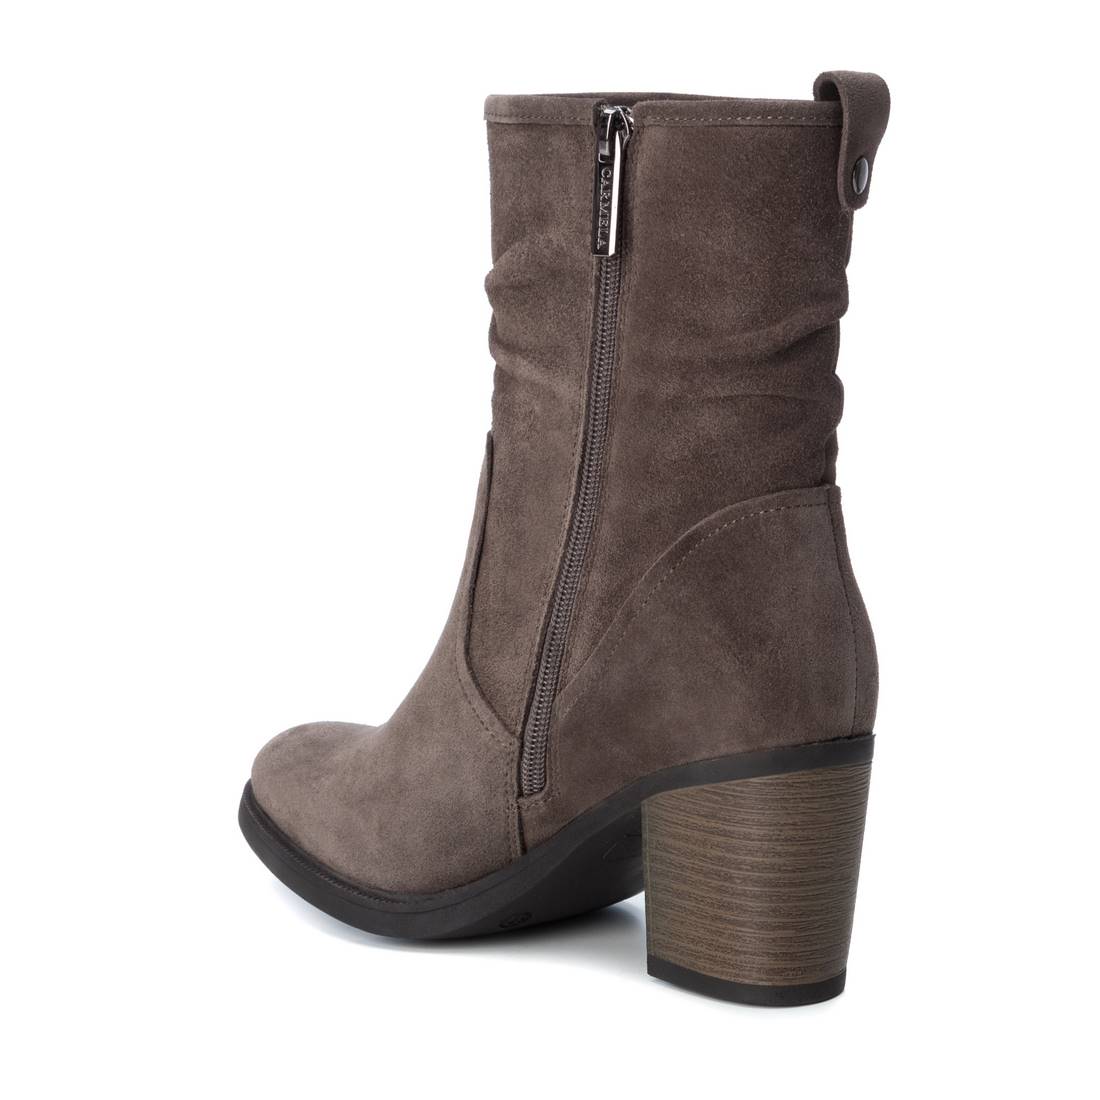 Carmela 67080 Taupe Suede Mid Calf Heeled Boots - elevate your sole